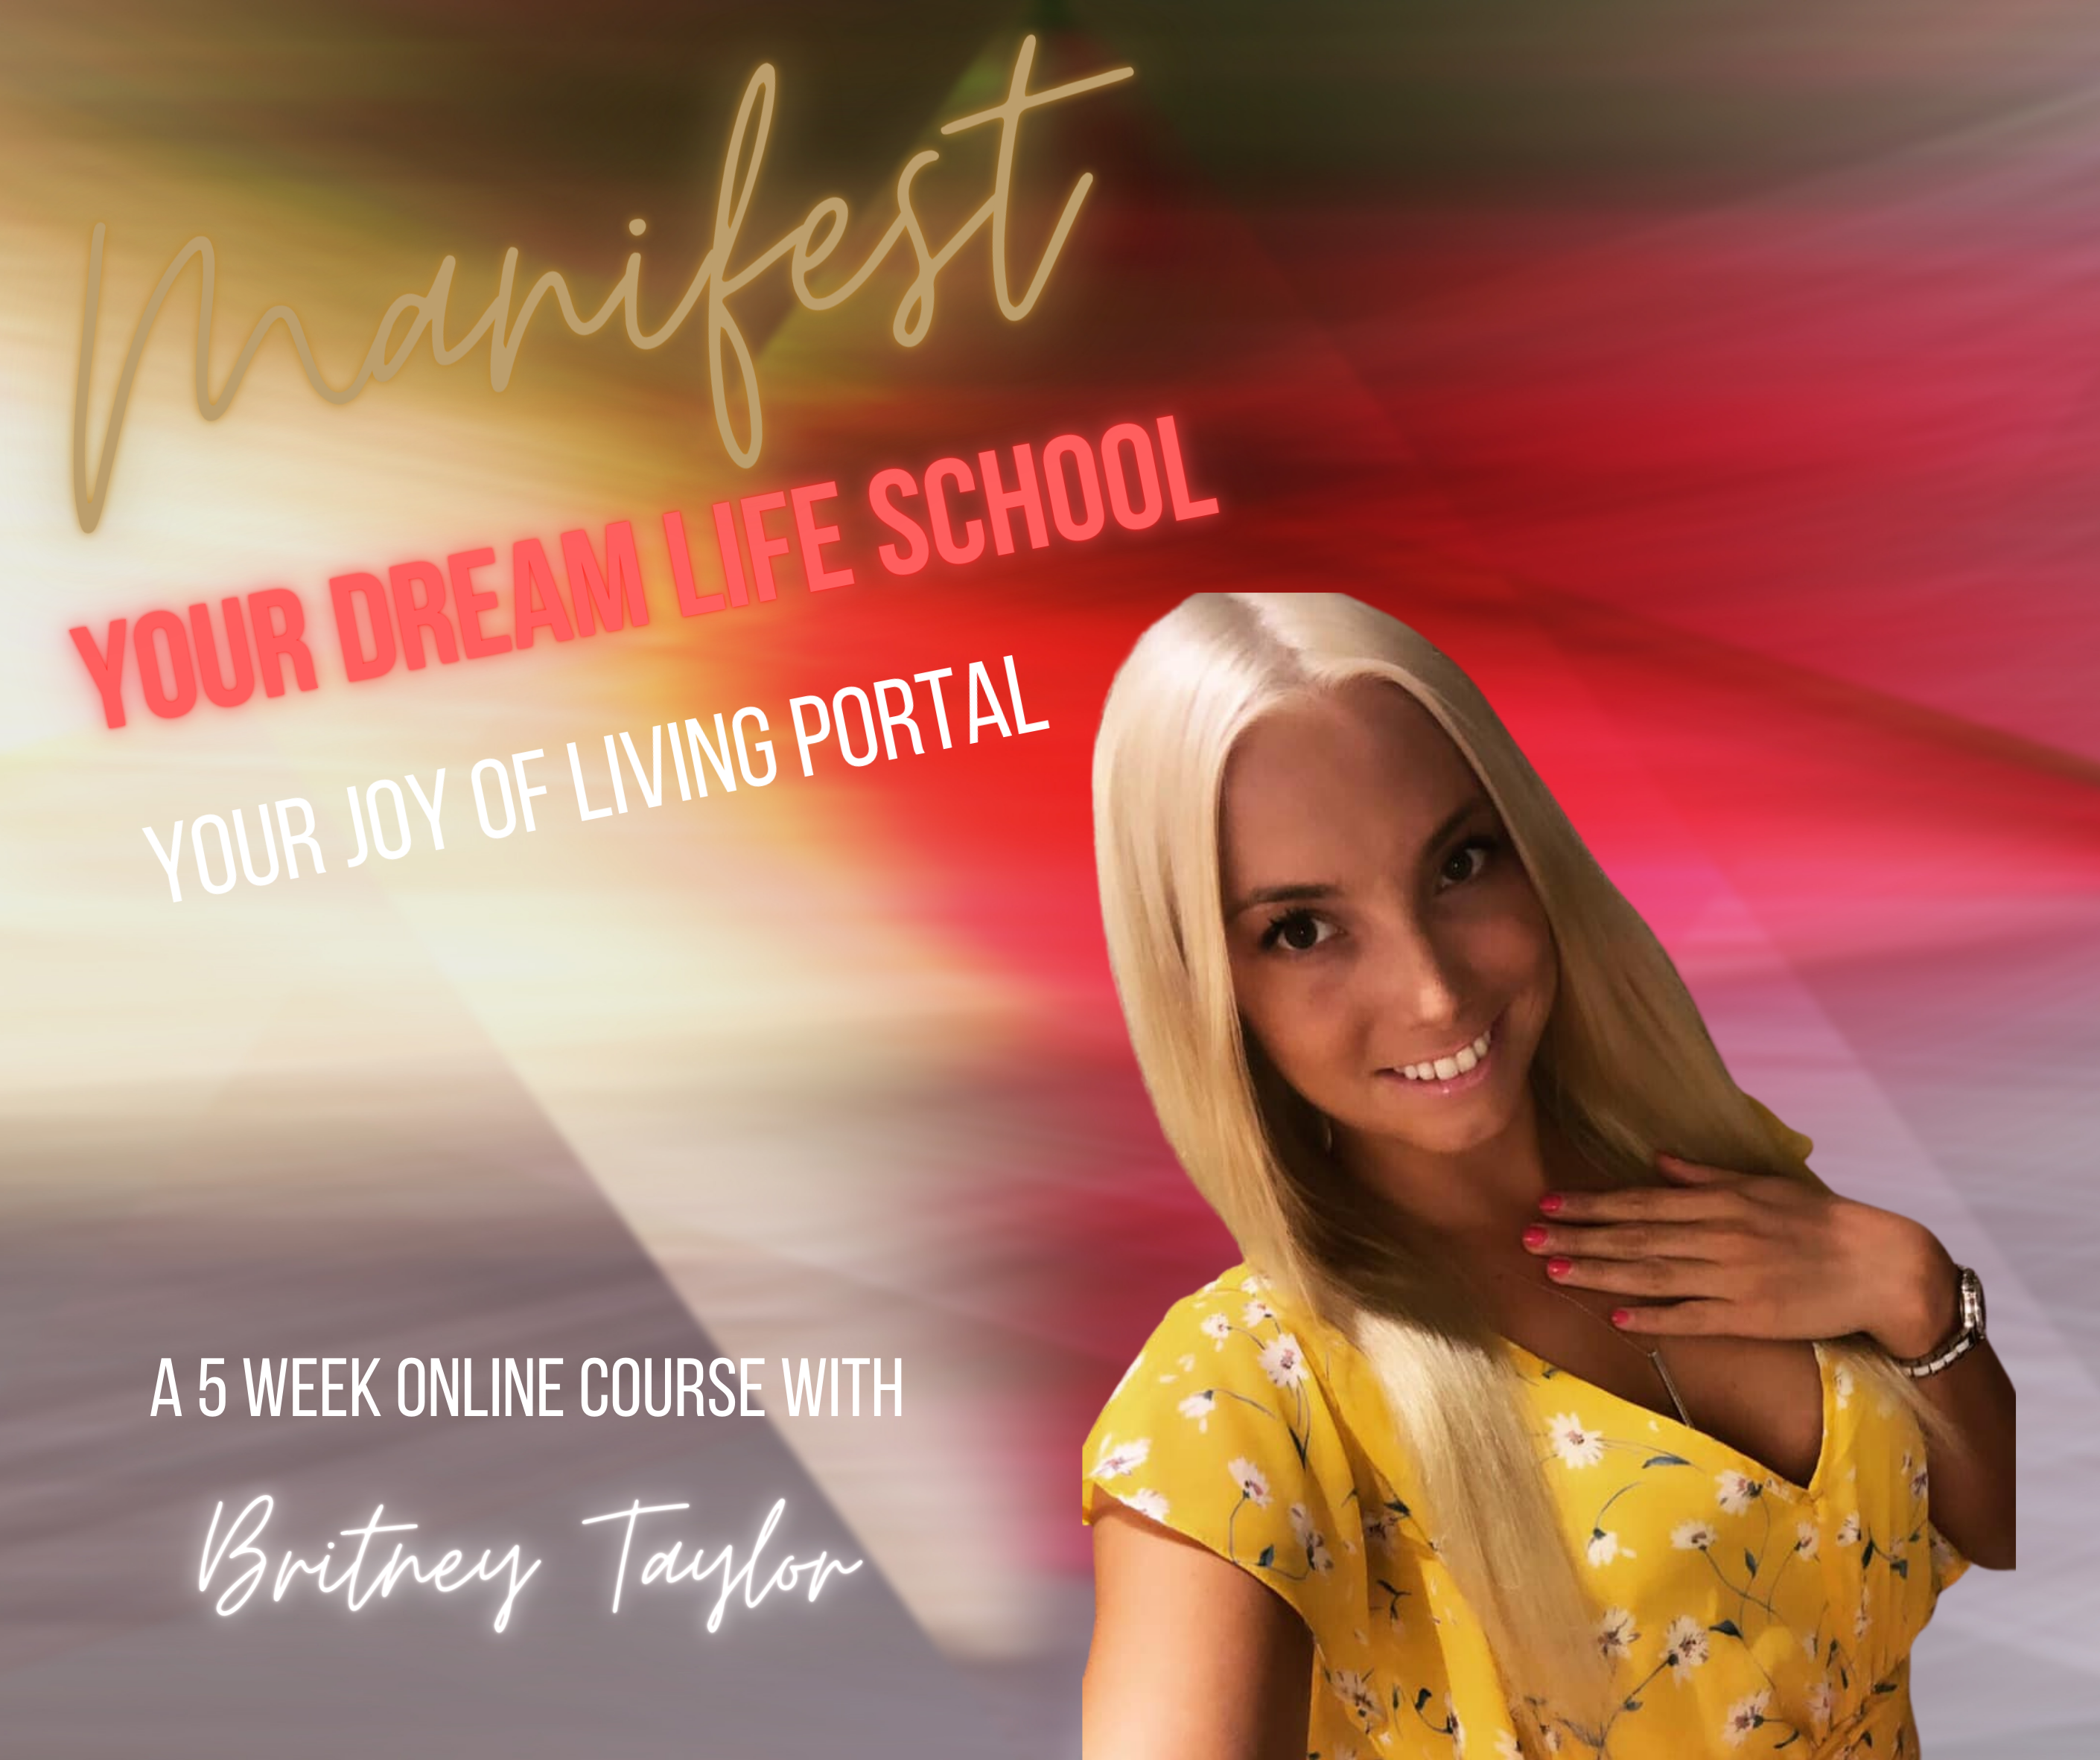 Manifest your Dream Life School with Britney Taylor